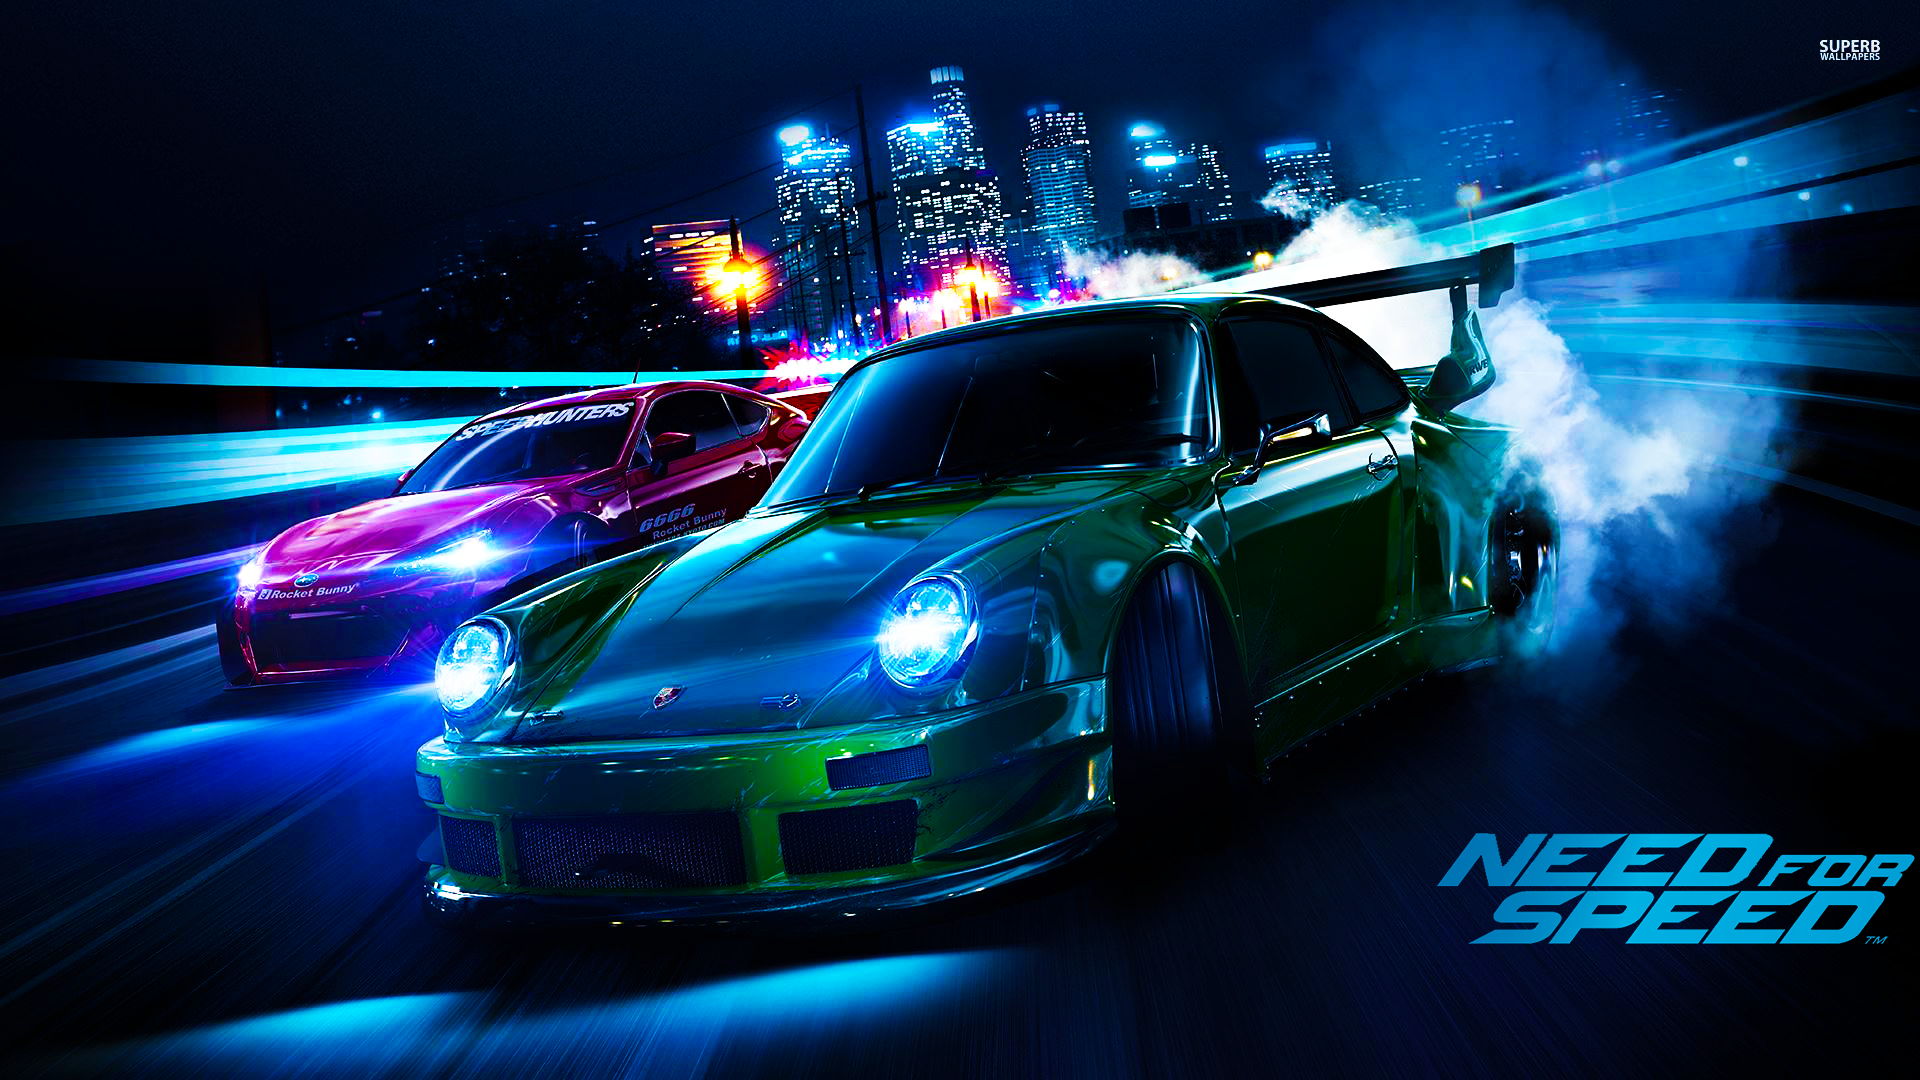 Need for Speed Games Ranked From Worst to Best 